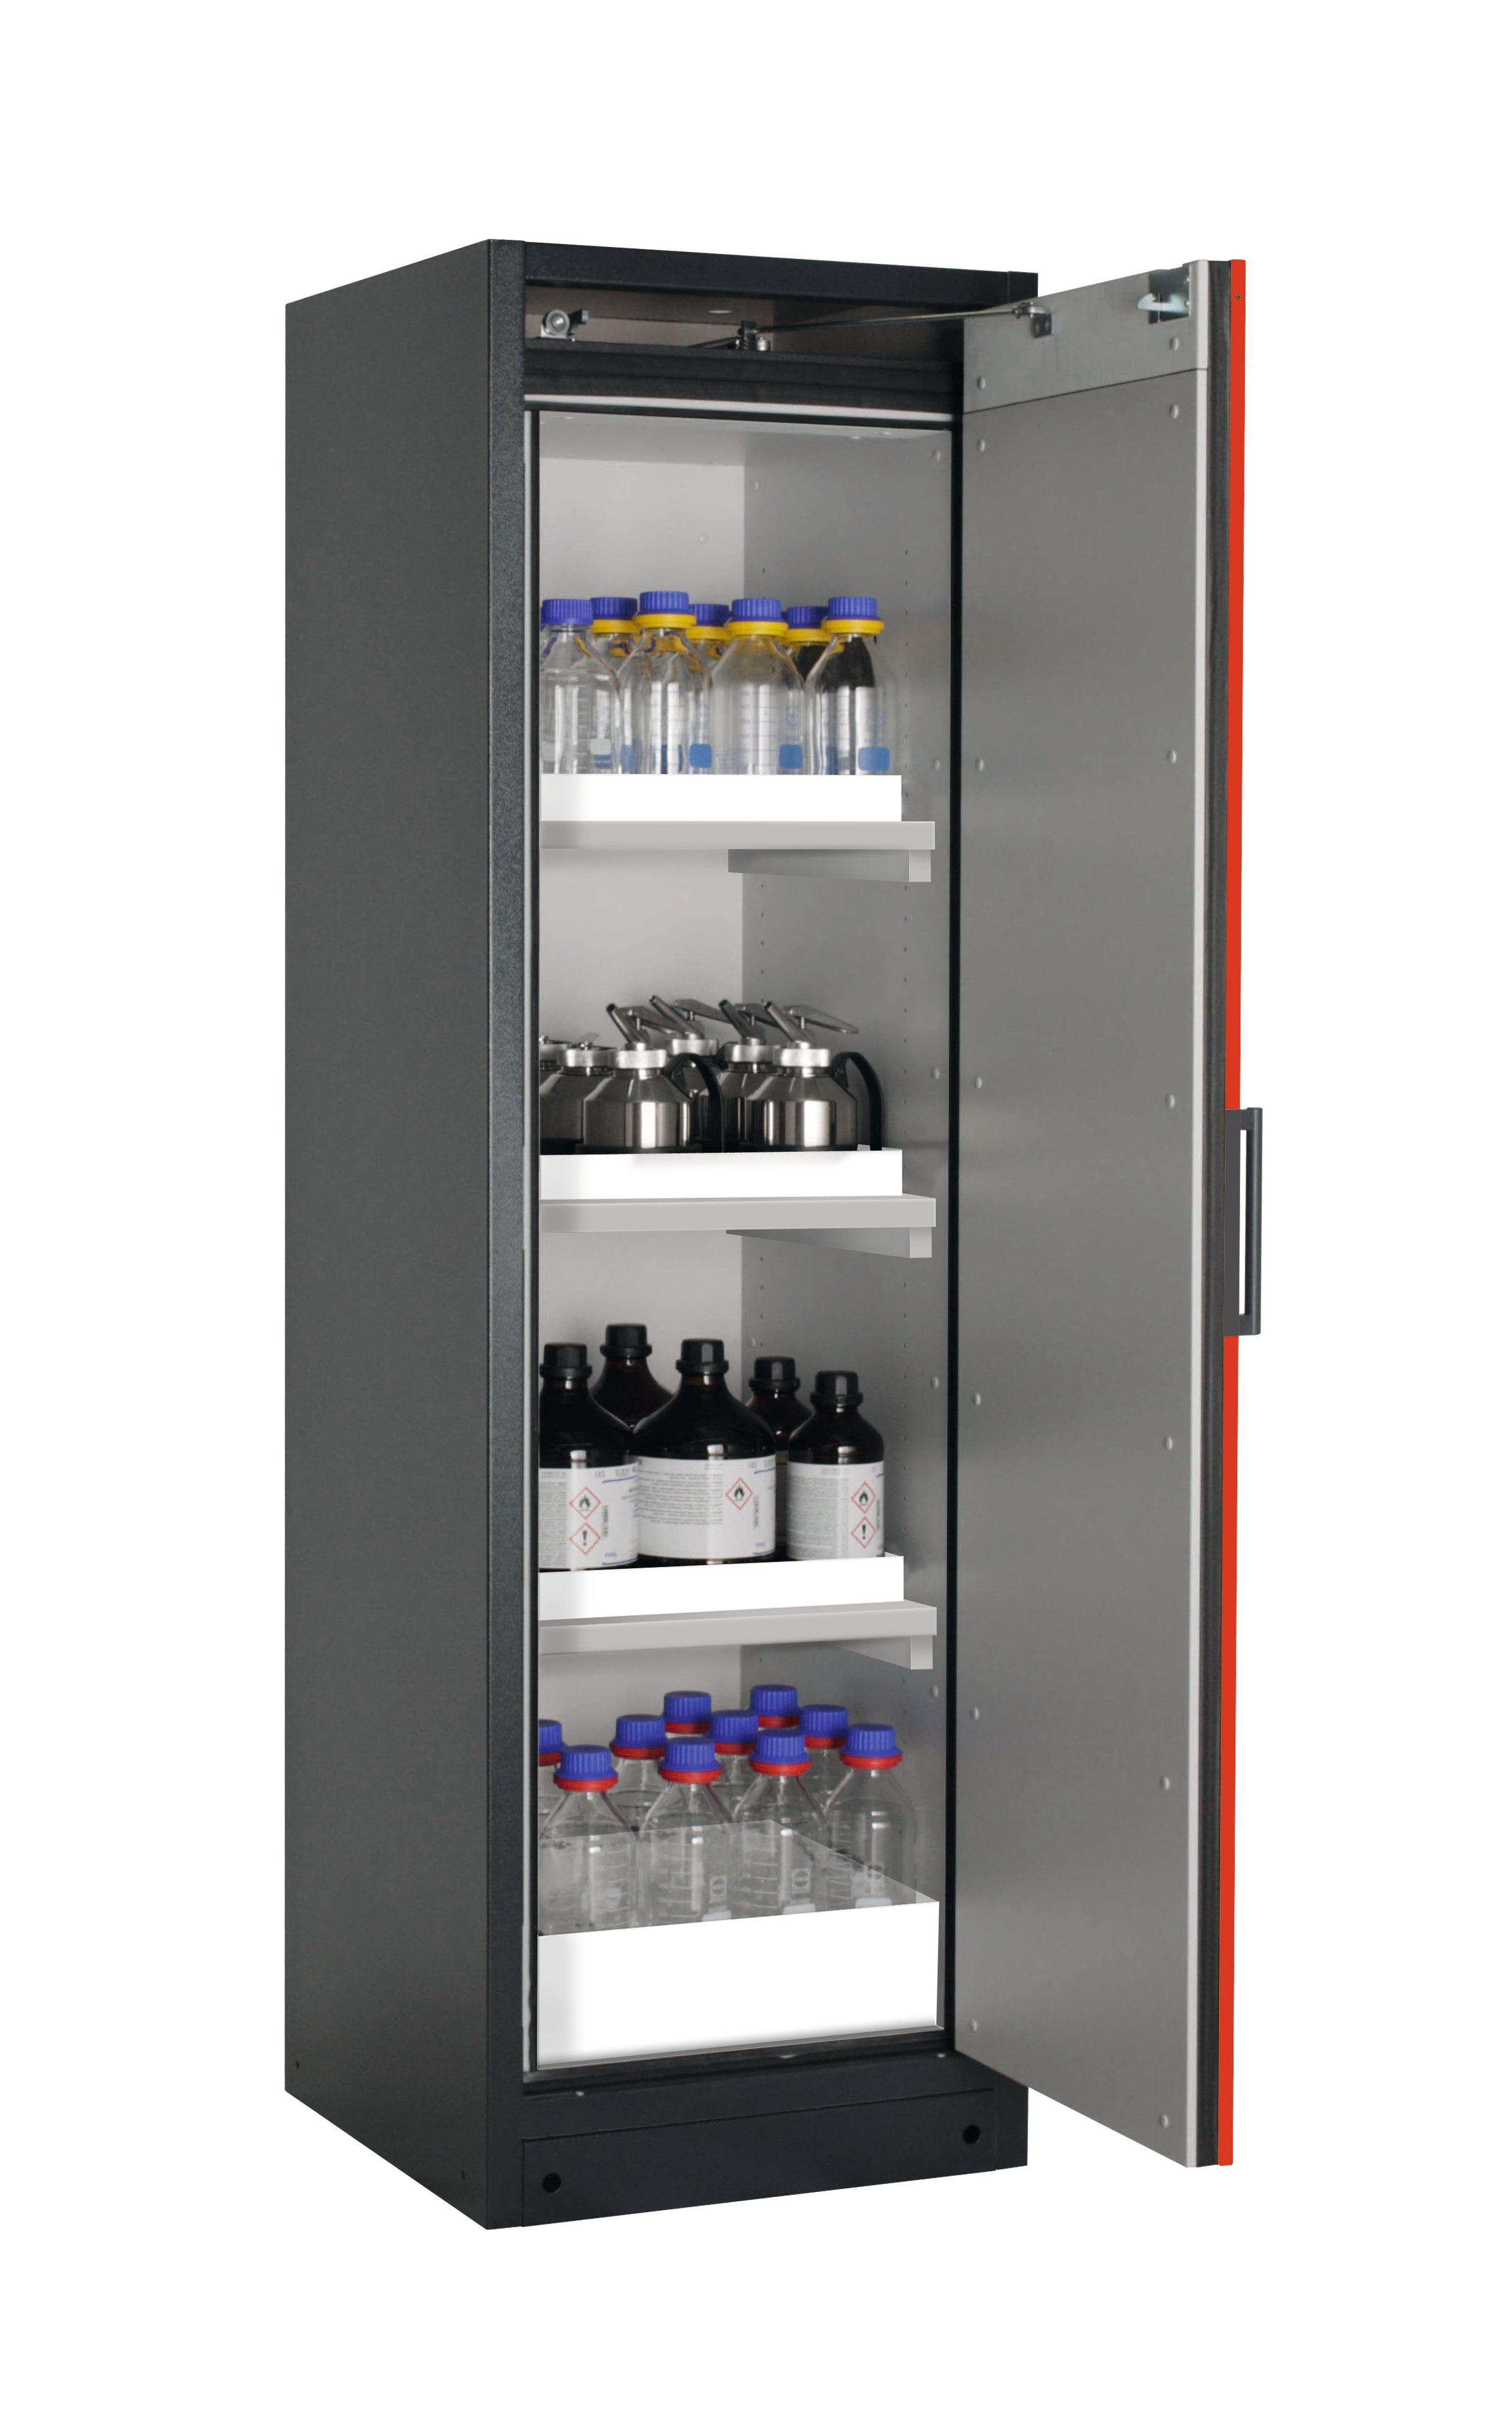 Type 90 safety storage cabinet Q-CLASSIC-90 model Q90.195.060.R in traffic red RAL 3020 with 3x tray shelf (standard) (polypropylene),